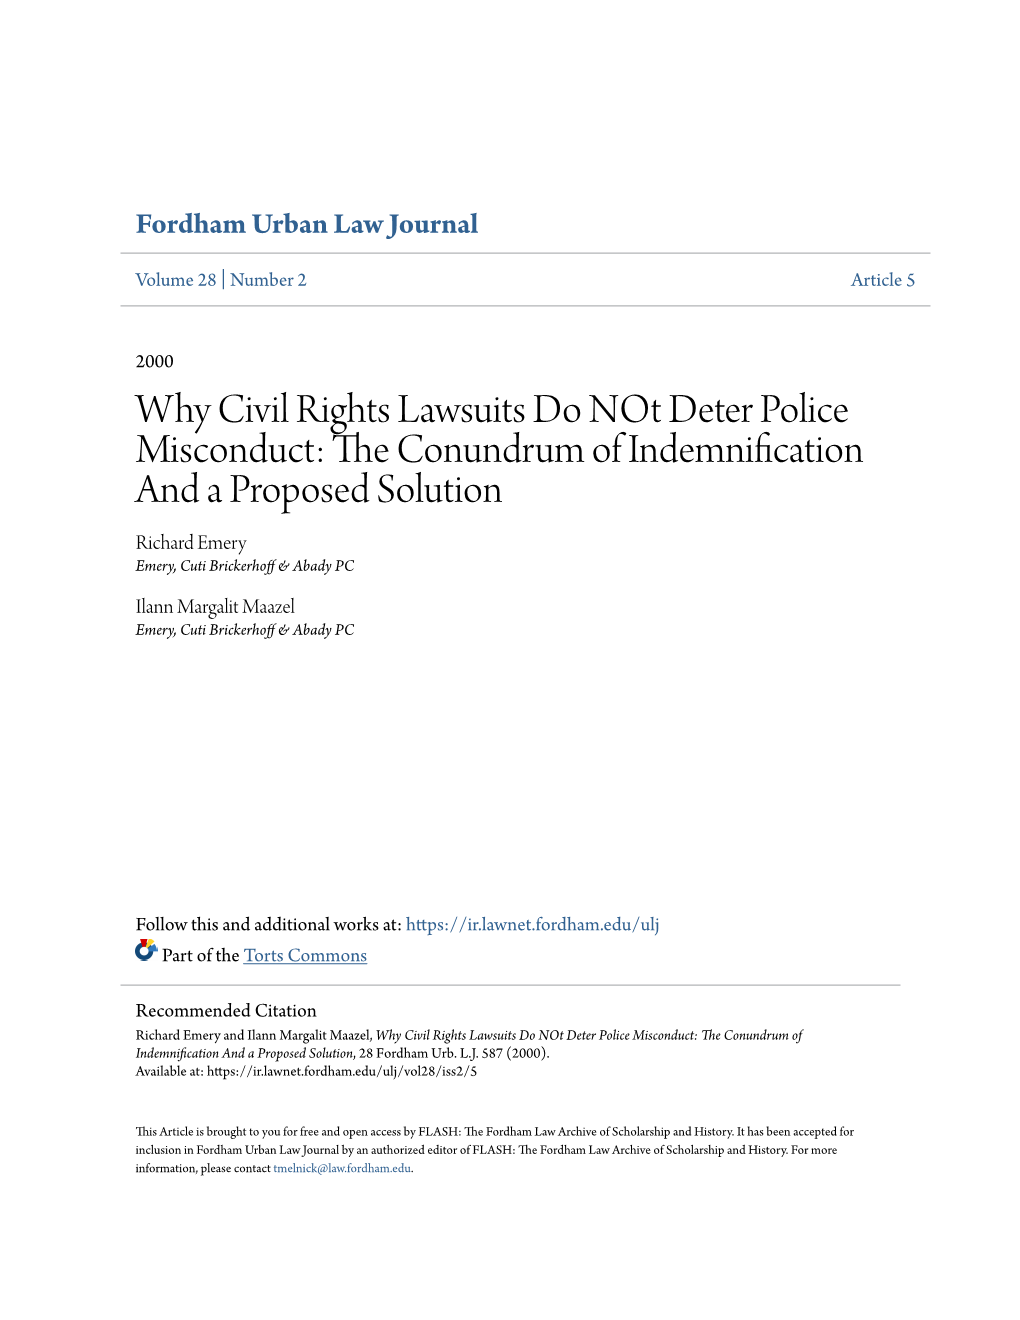 Why Civil Rights Lawsuits Do Not Deter Police Misconduct: the Onc Undrum of Indemnification and a Proposed Solution Richard Emery Emery, Cuti Brickerhoff & Ba Ady PC